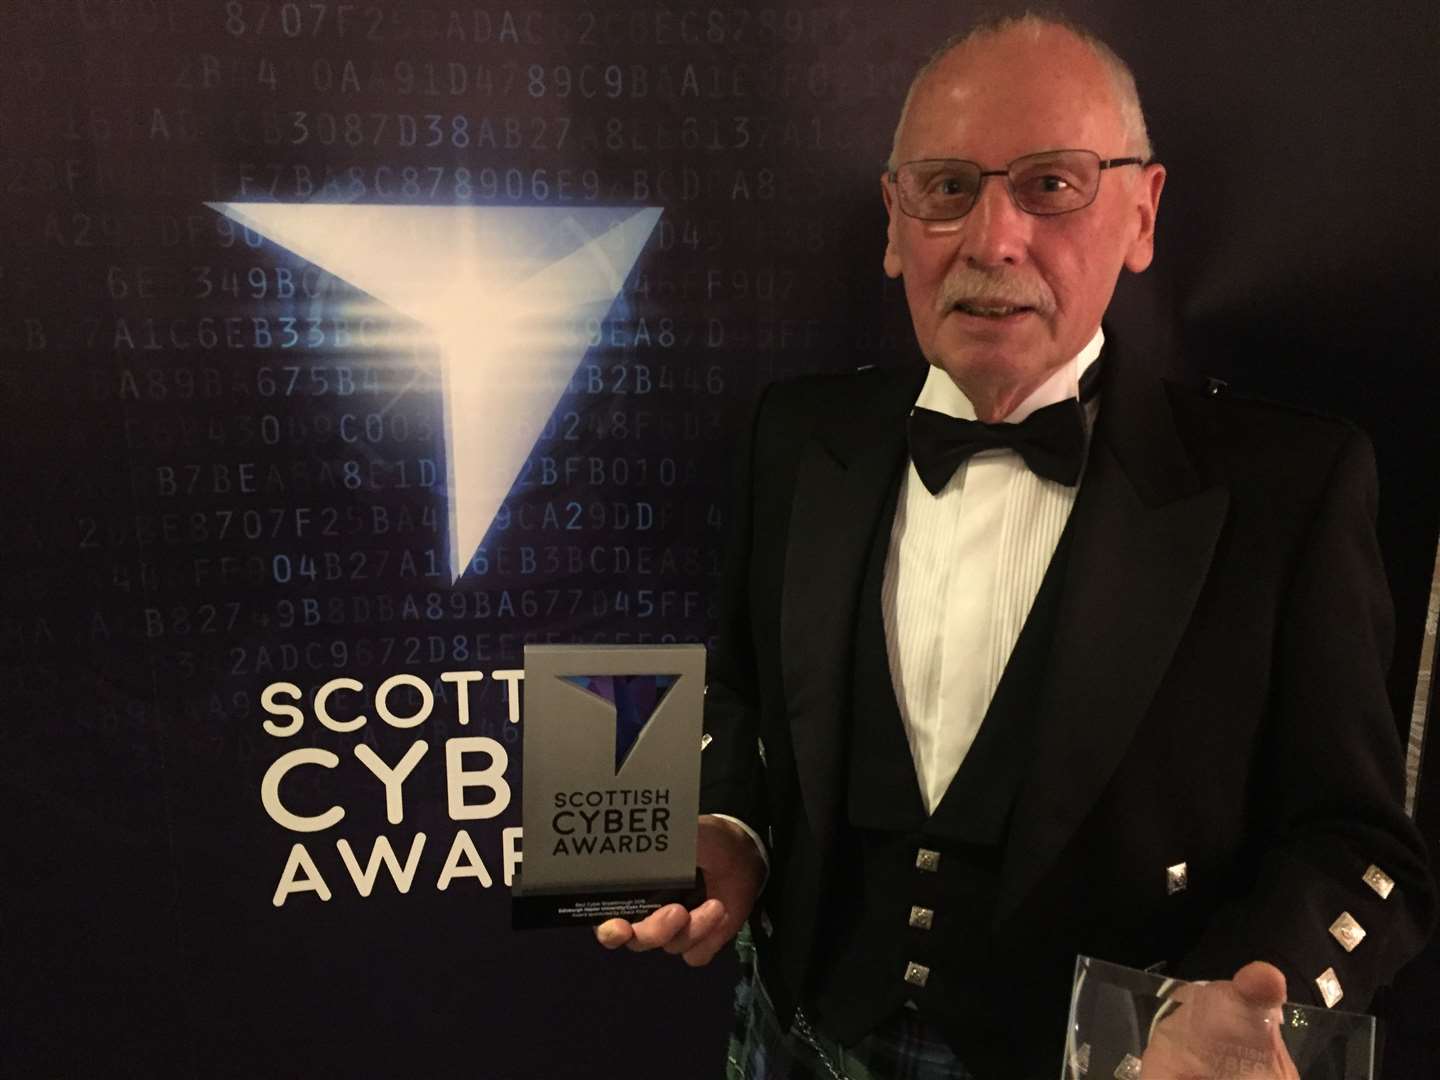 Dr Phil Penrose has won the ‘Oscar’ for Best Cyber Breakthrough at the Scottish Cyber Awards.